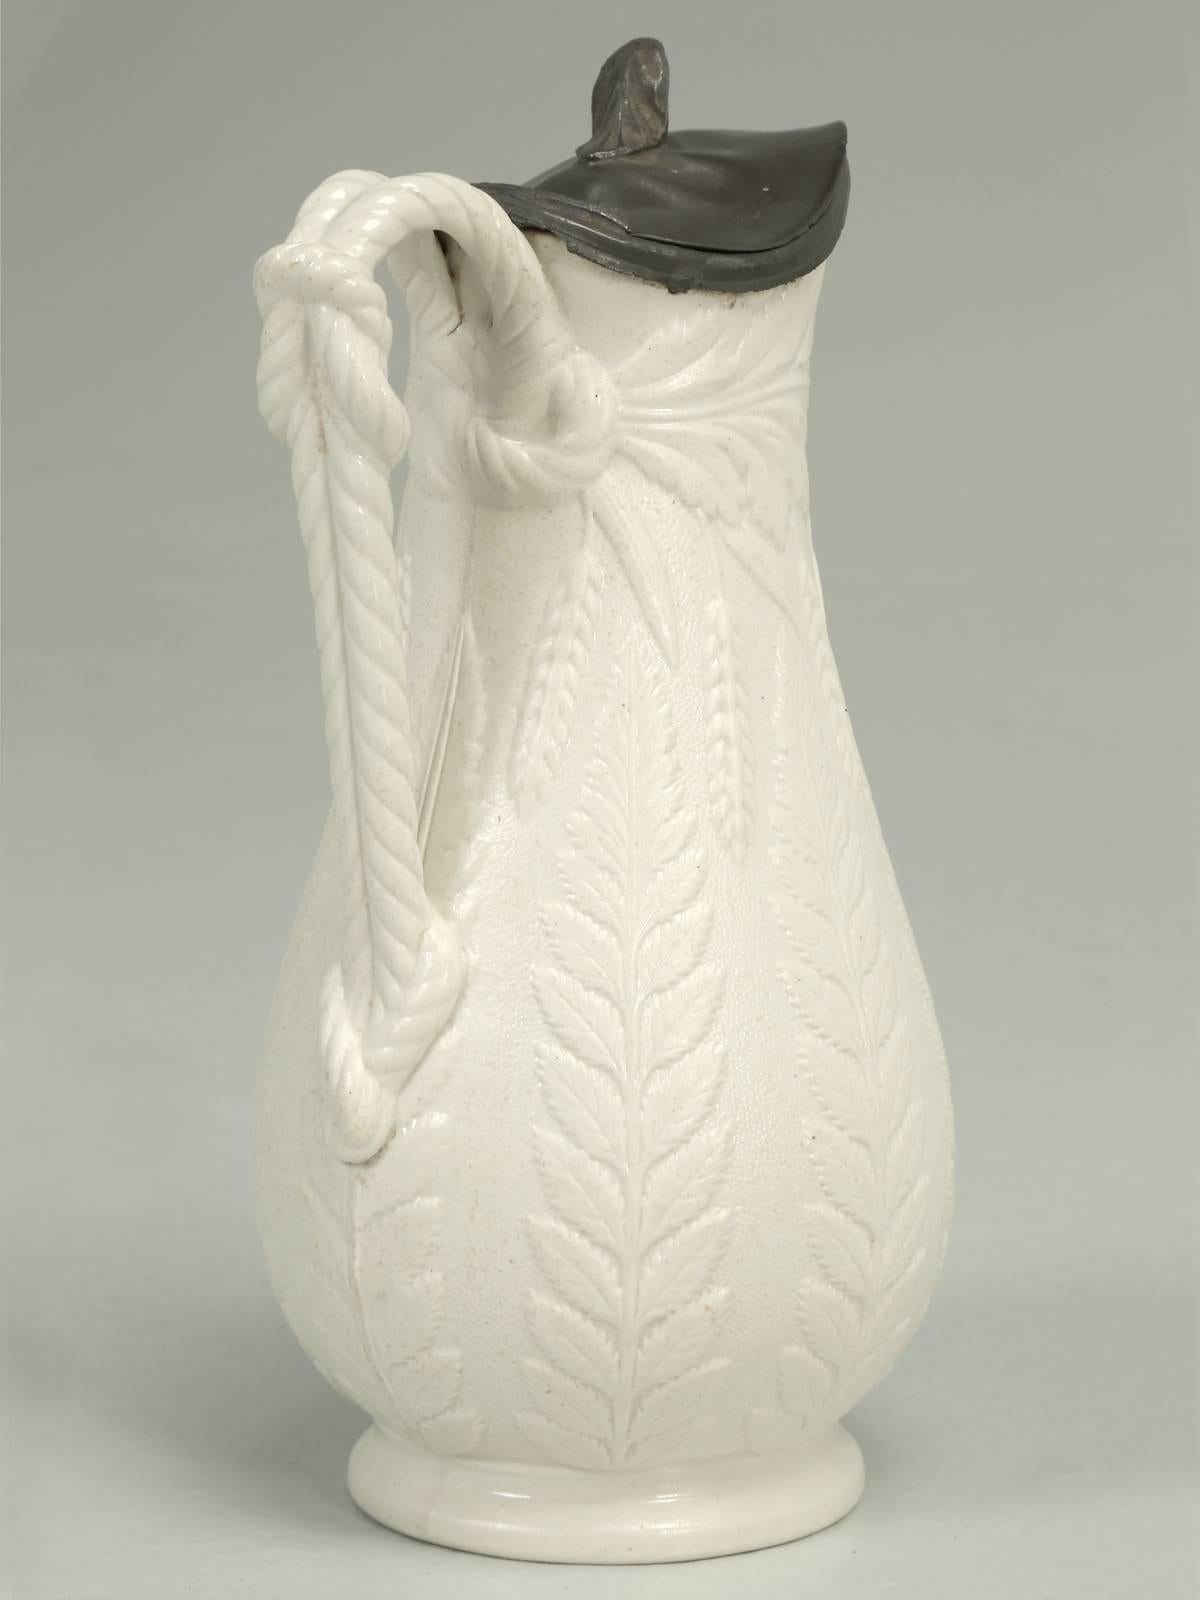 Antique English Staffordshire Fern-Leaf relief pitcher with applied rope handle and unusual weighted lid. We believe it was produced in 1848. There are no visual flaws or any evidence of prior repairs.